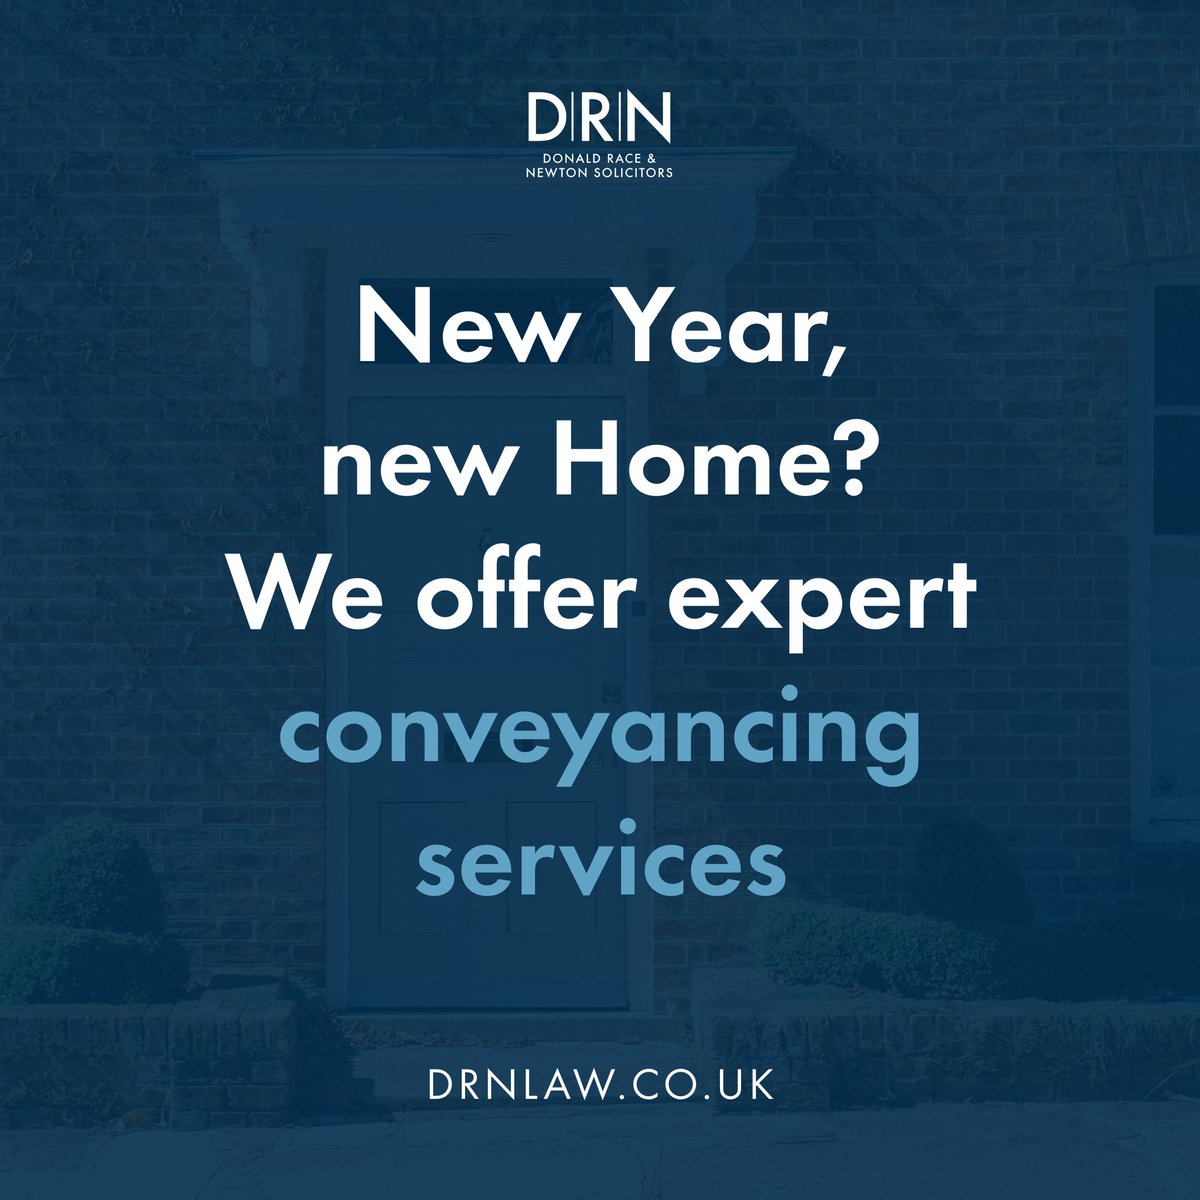 New Year, New Home? 🏡 We offer expert conveyancing services! Whether you're buying, selling, or remortgaging, our experienced solicitors are here to make your property journey seamless and stress-free. Get a FREE instant conveyancing quote online 👉bit.ly/3fGq5Ae